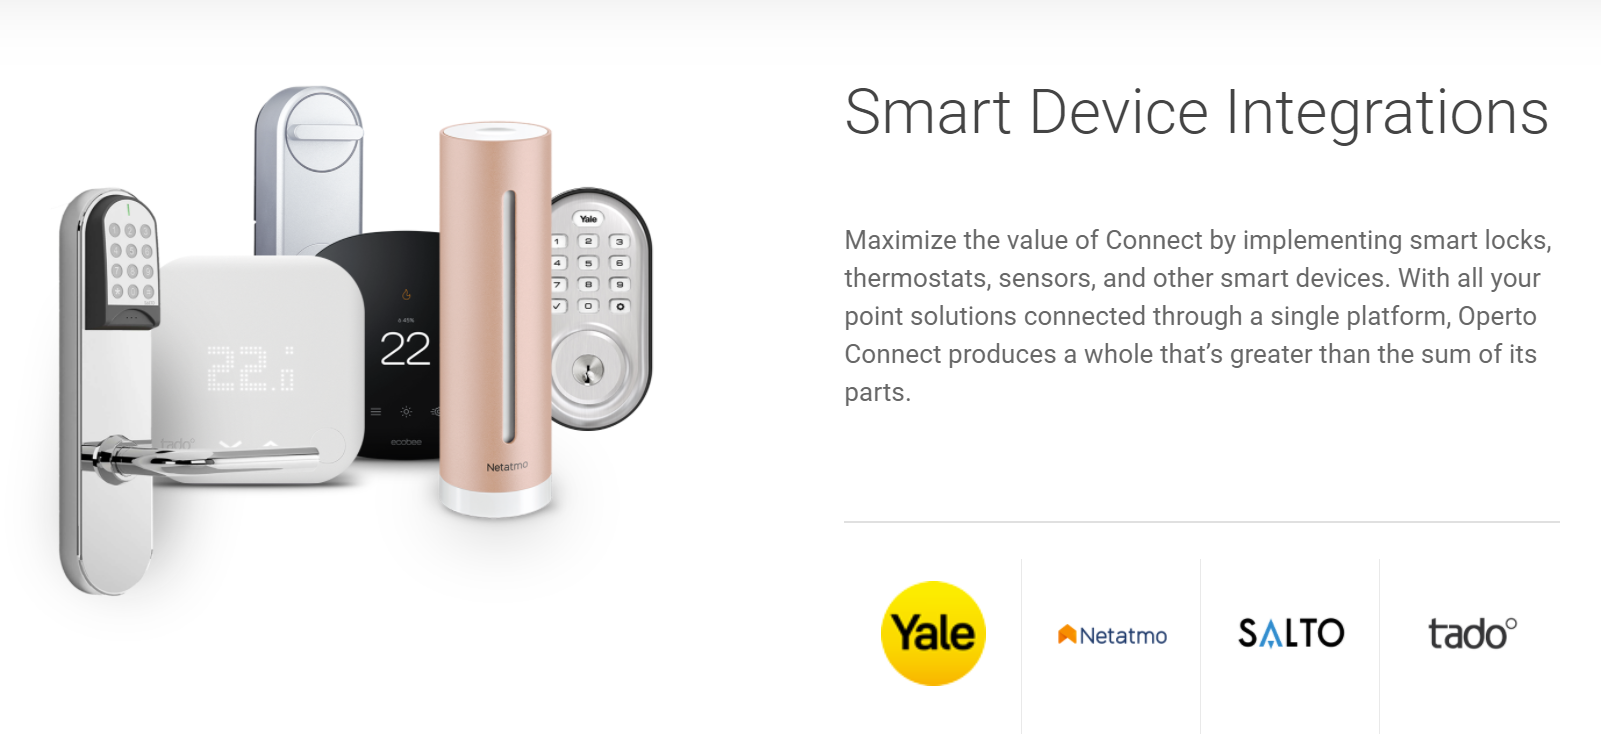 04_ Smart devices that integrate with Operto and keyless entry providers